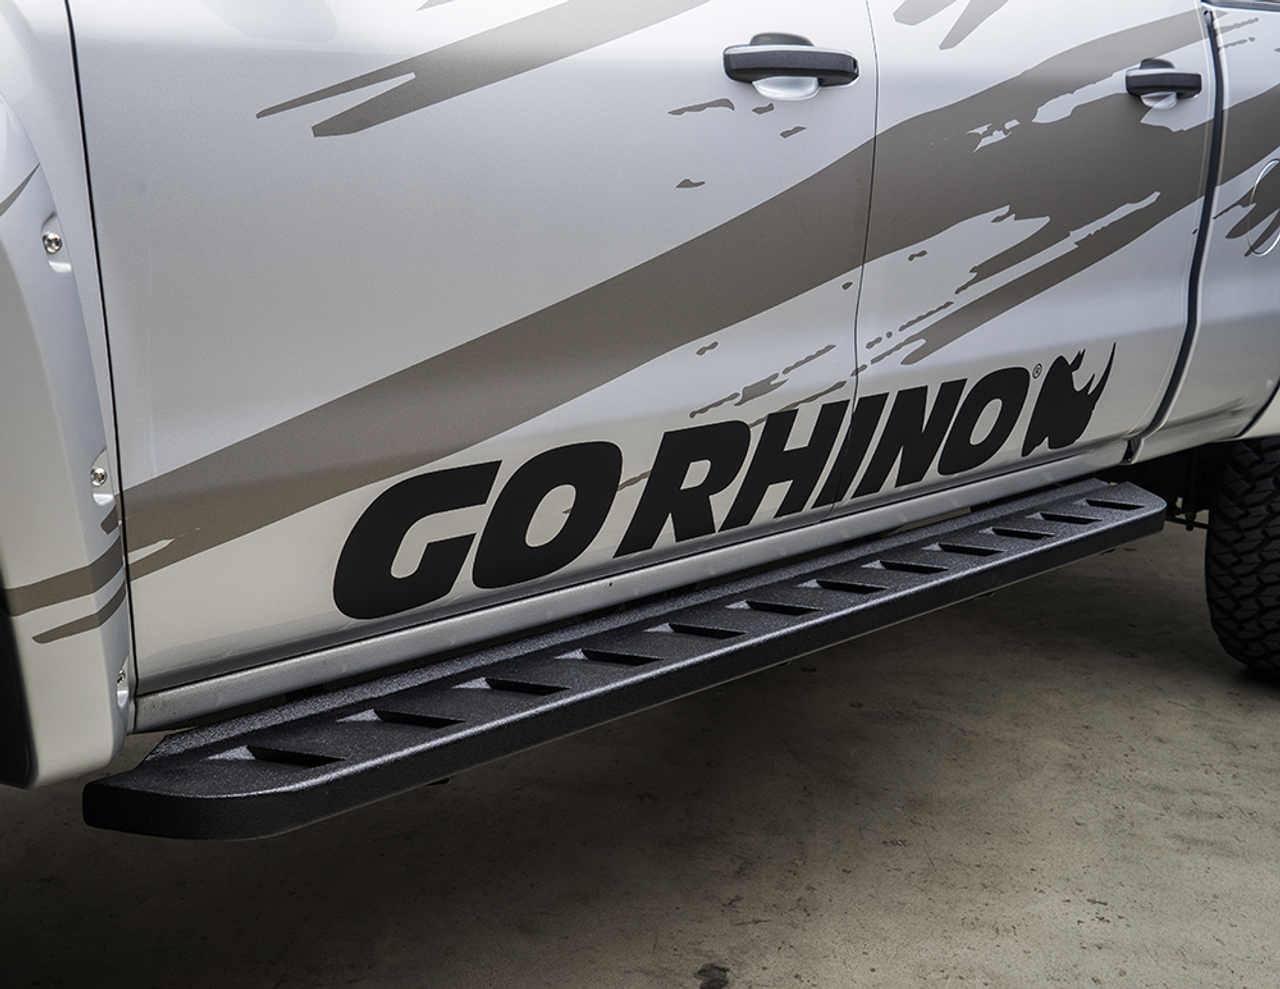 Go Rhino 63441734810PC Ford, F-250, F-350, 2017 - 2021, RB10 Running boards - Complete Kit:  1 pair RB10 Drop Steps, Galvanized Steel, Textured black, 630048PC RB10 + 6941555 RB Brackets + 69420000PC Drop Down Step